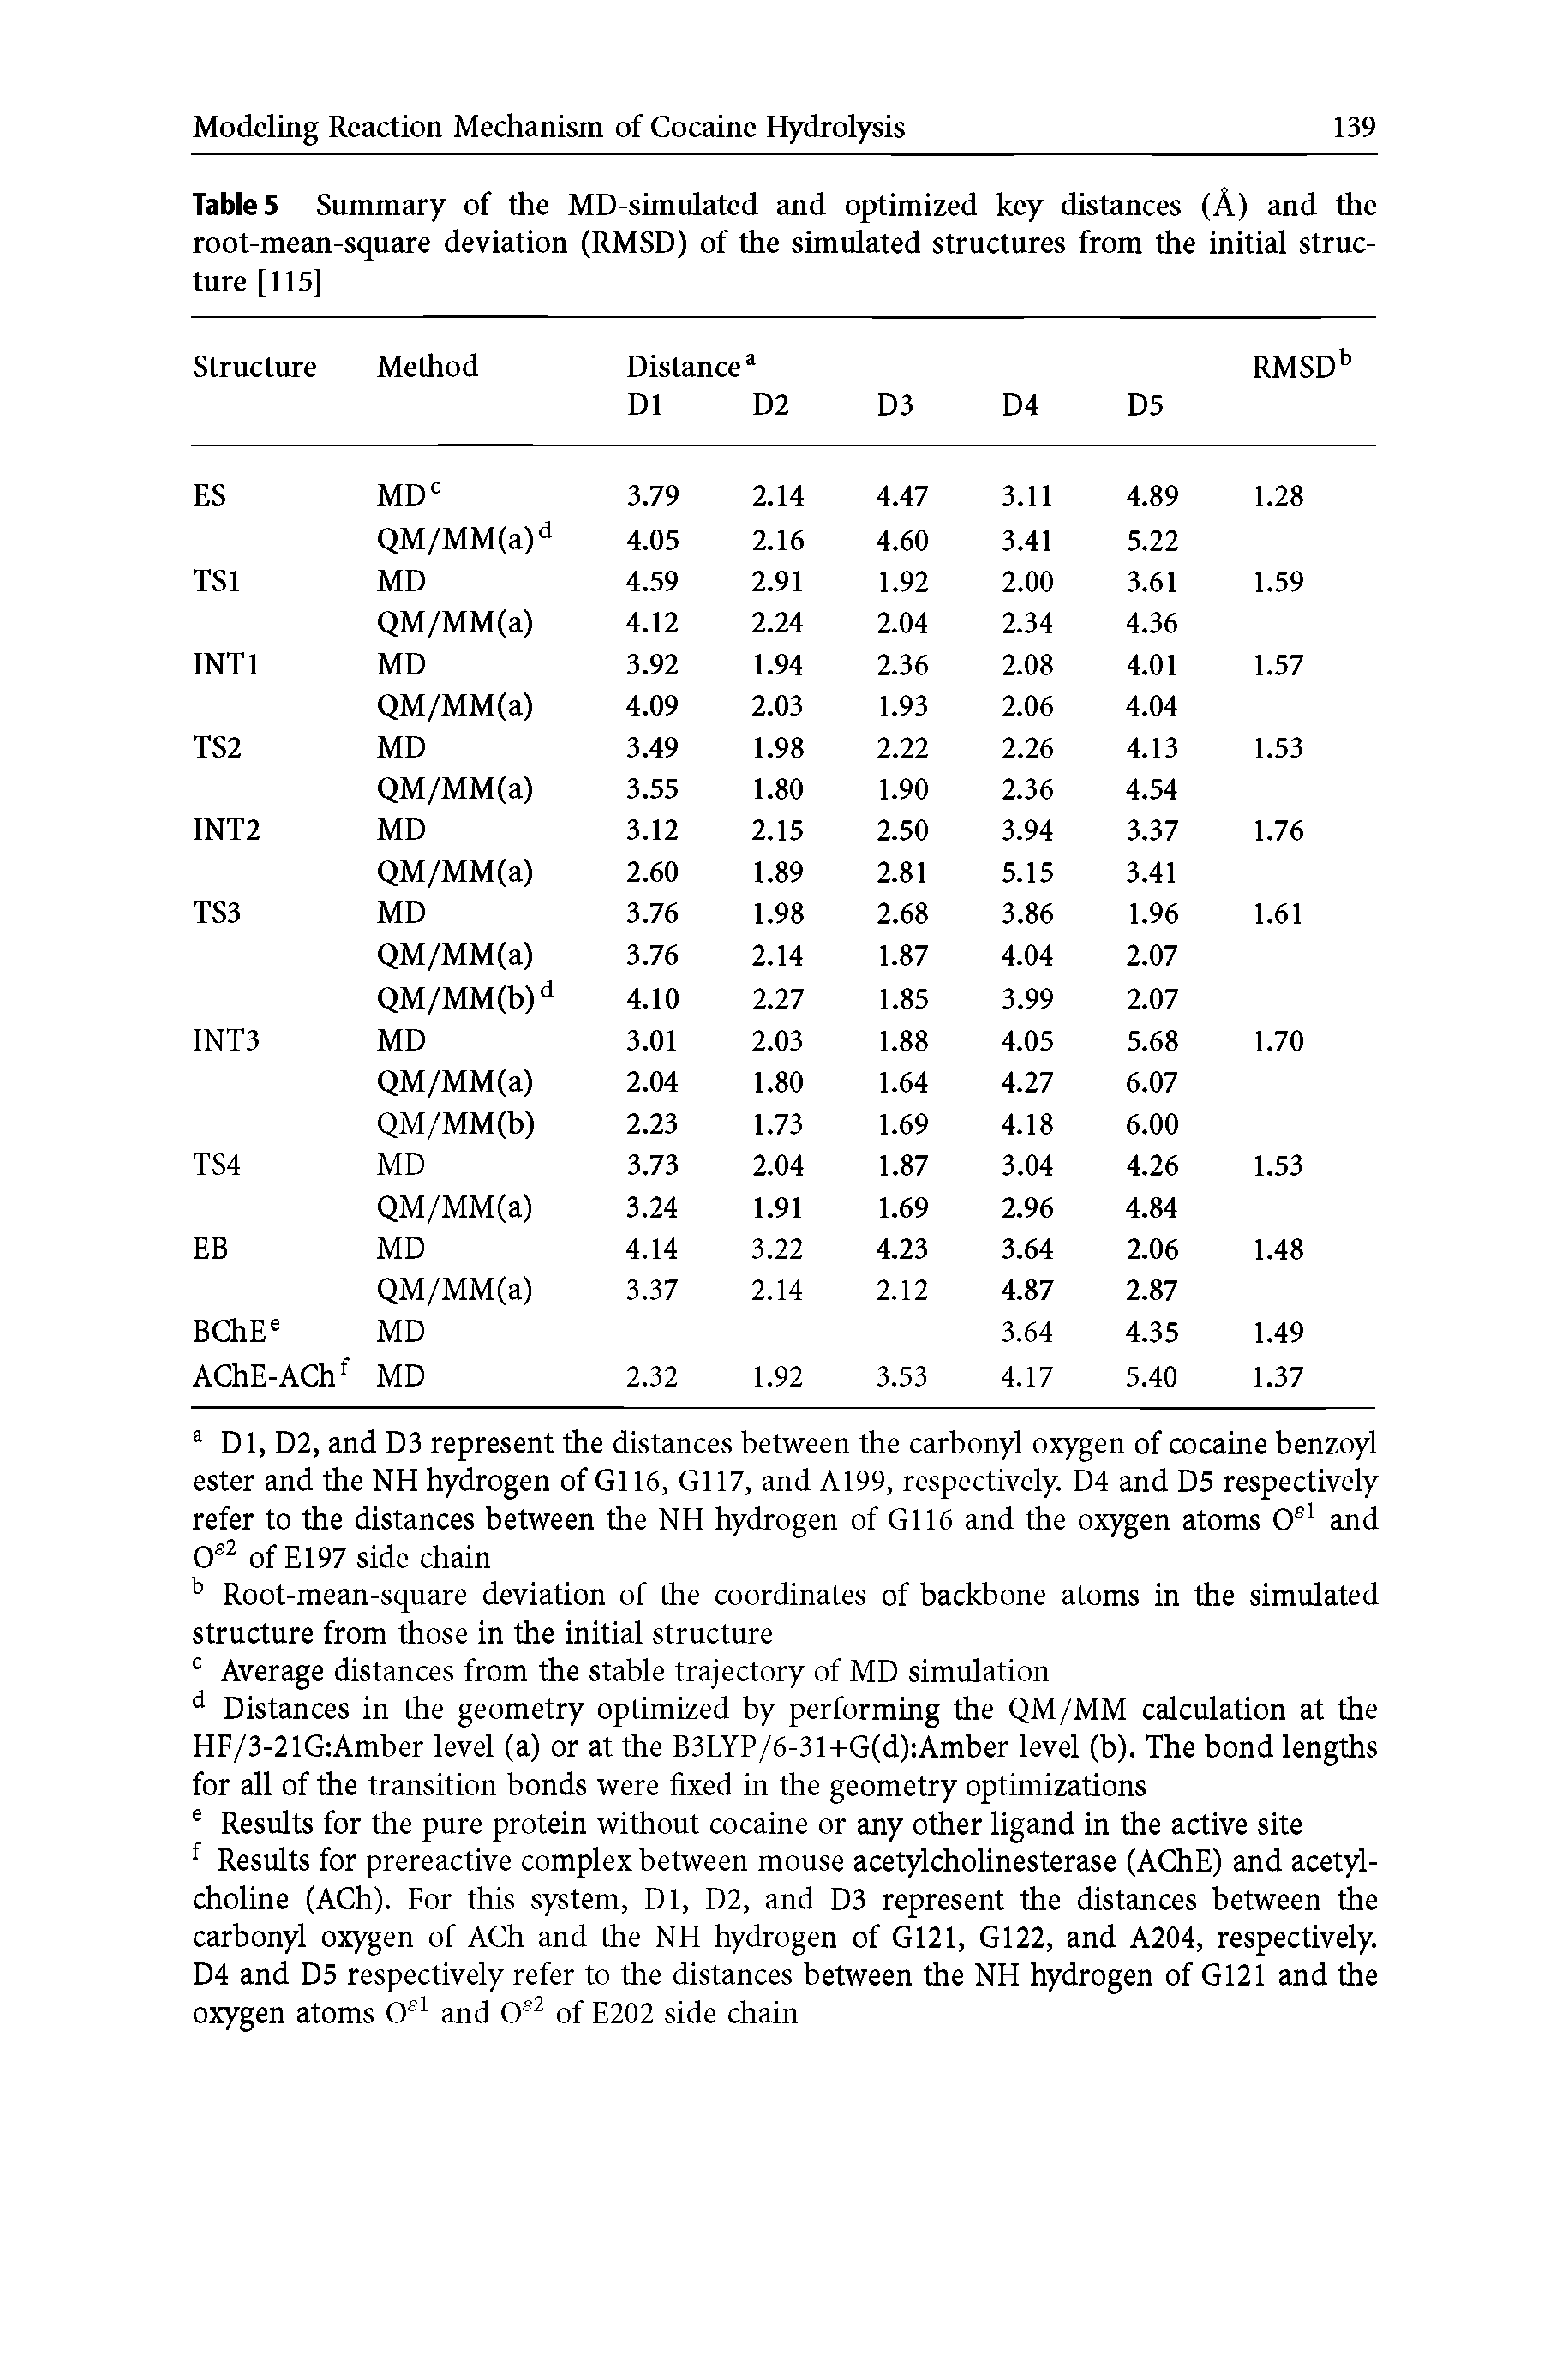 Tables Summary of the MD-simulated and optimized key distances (A) and the root-mean-square deviation (RMSD) of the simulated structures from the initial structure [115]...